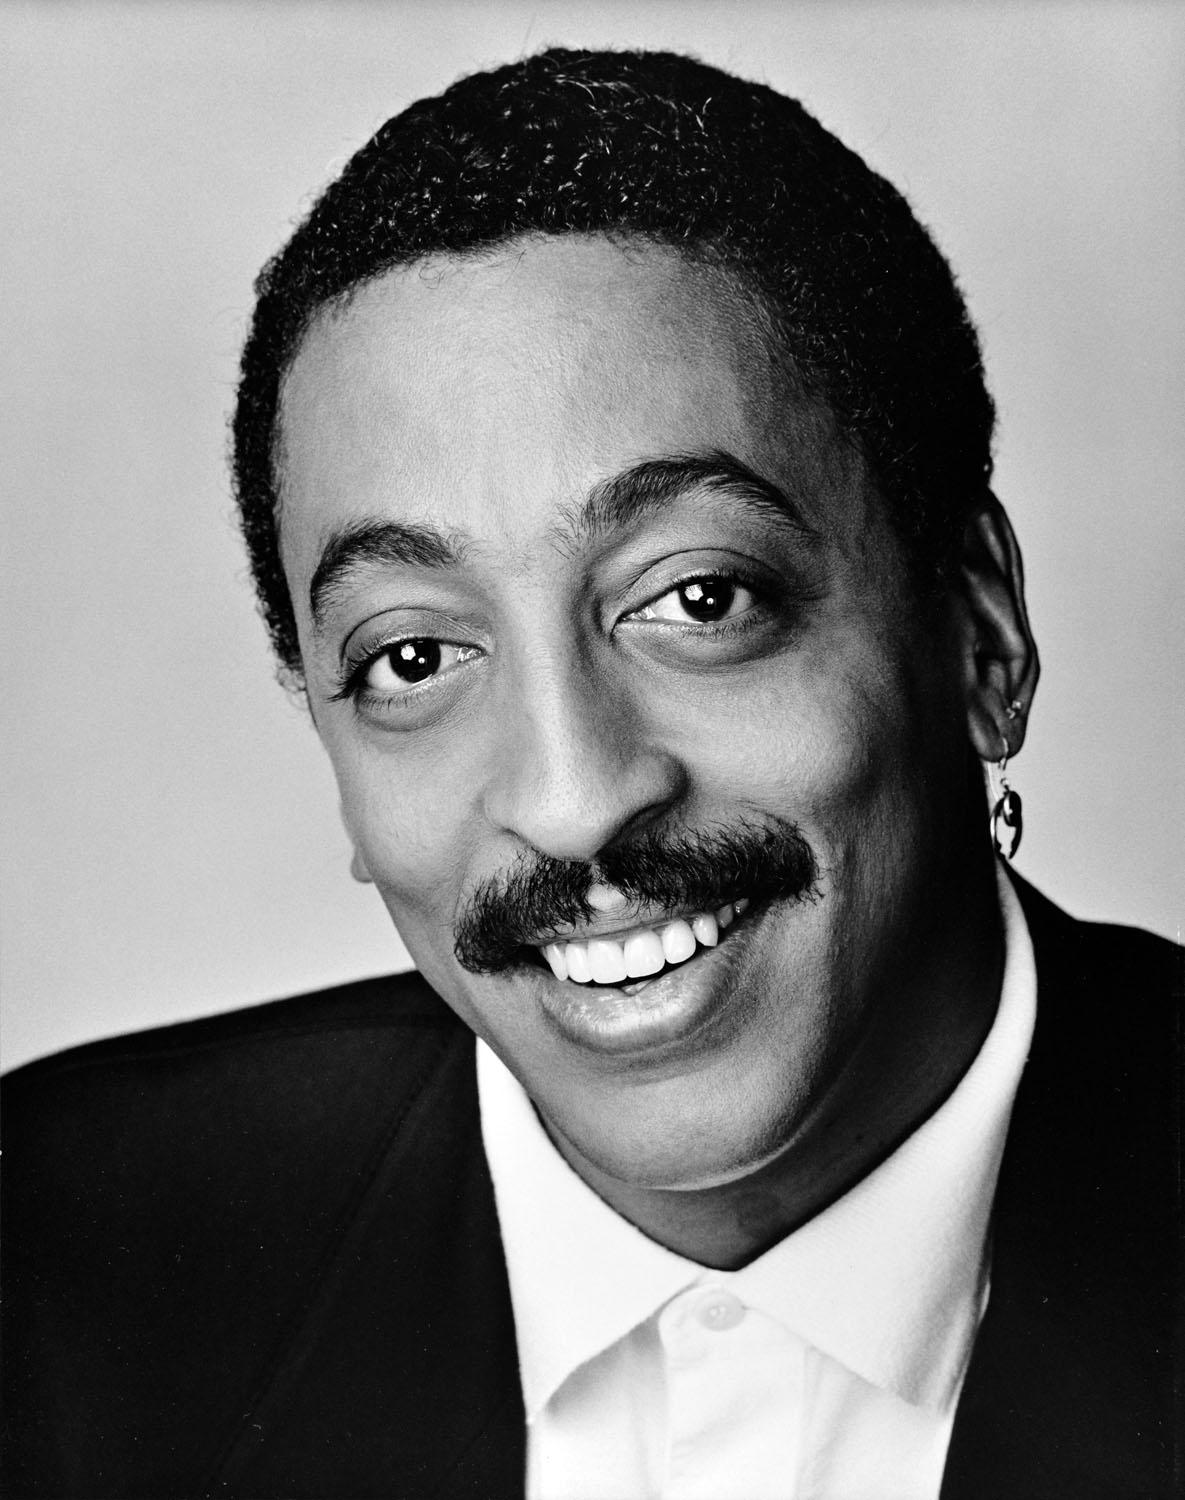 Jack Mitchell Portrait Photograph - Film, TV, and Broadway Star Gregory Hines